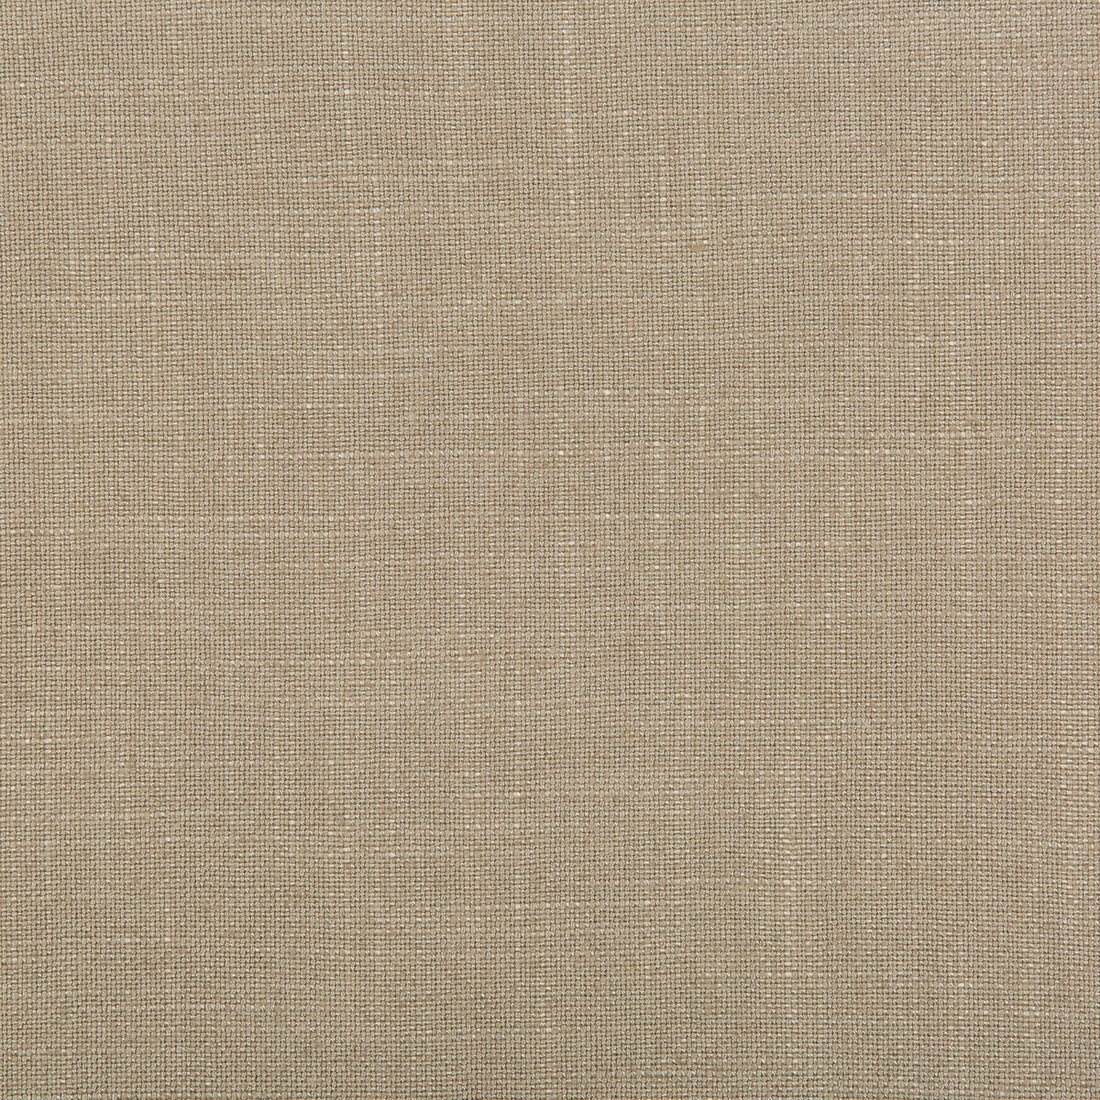 Aura fabric in driftwood color - pattern 35520.1066.0 - by Kravet Design